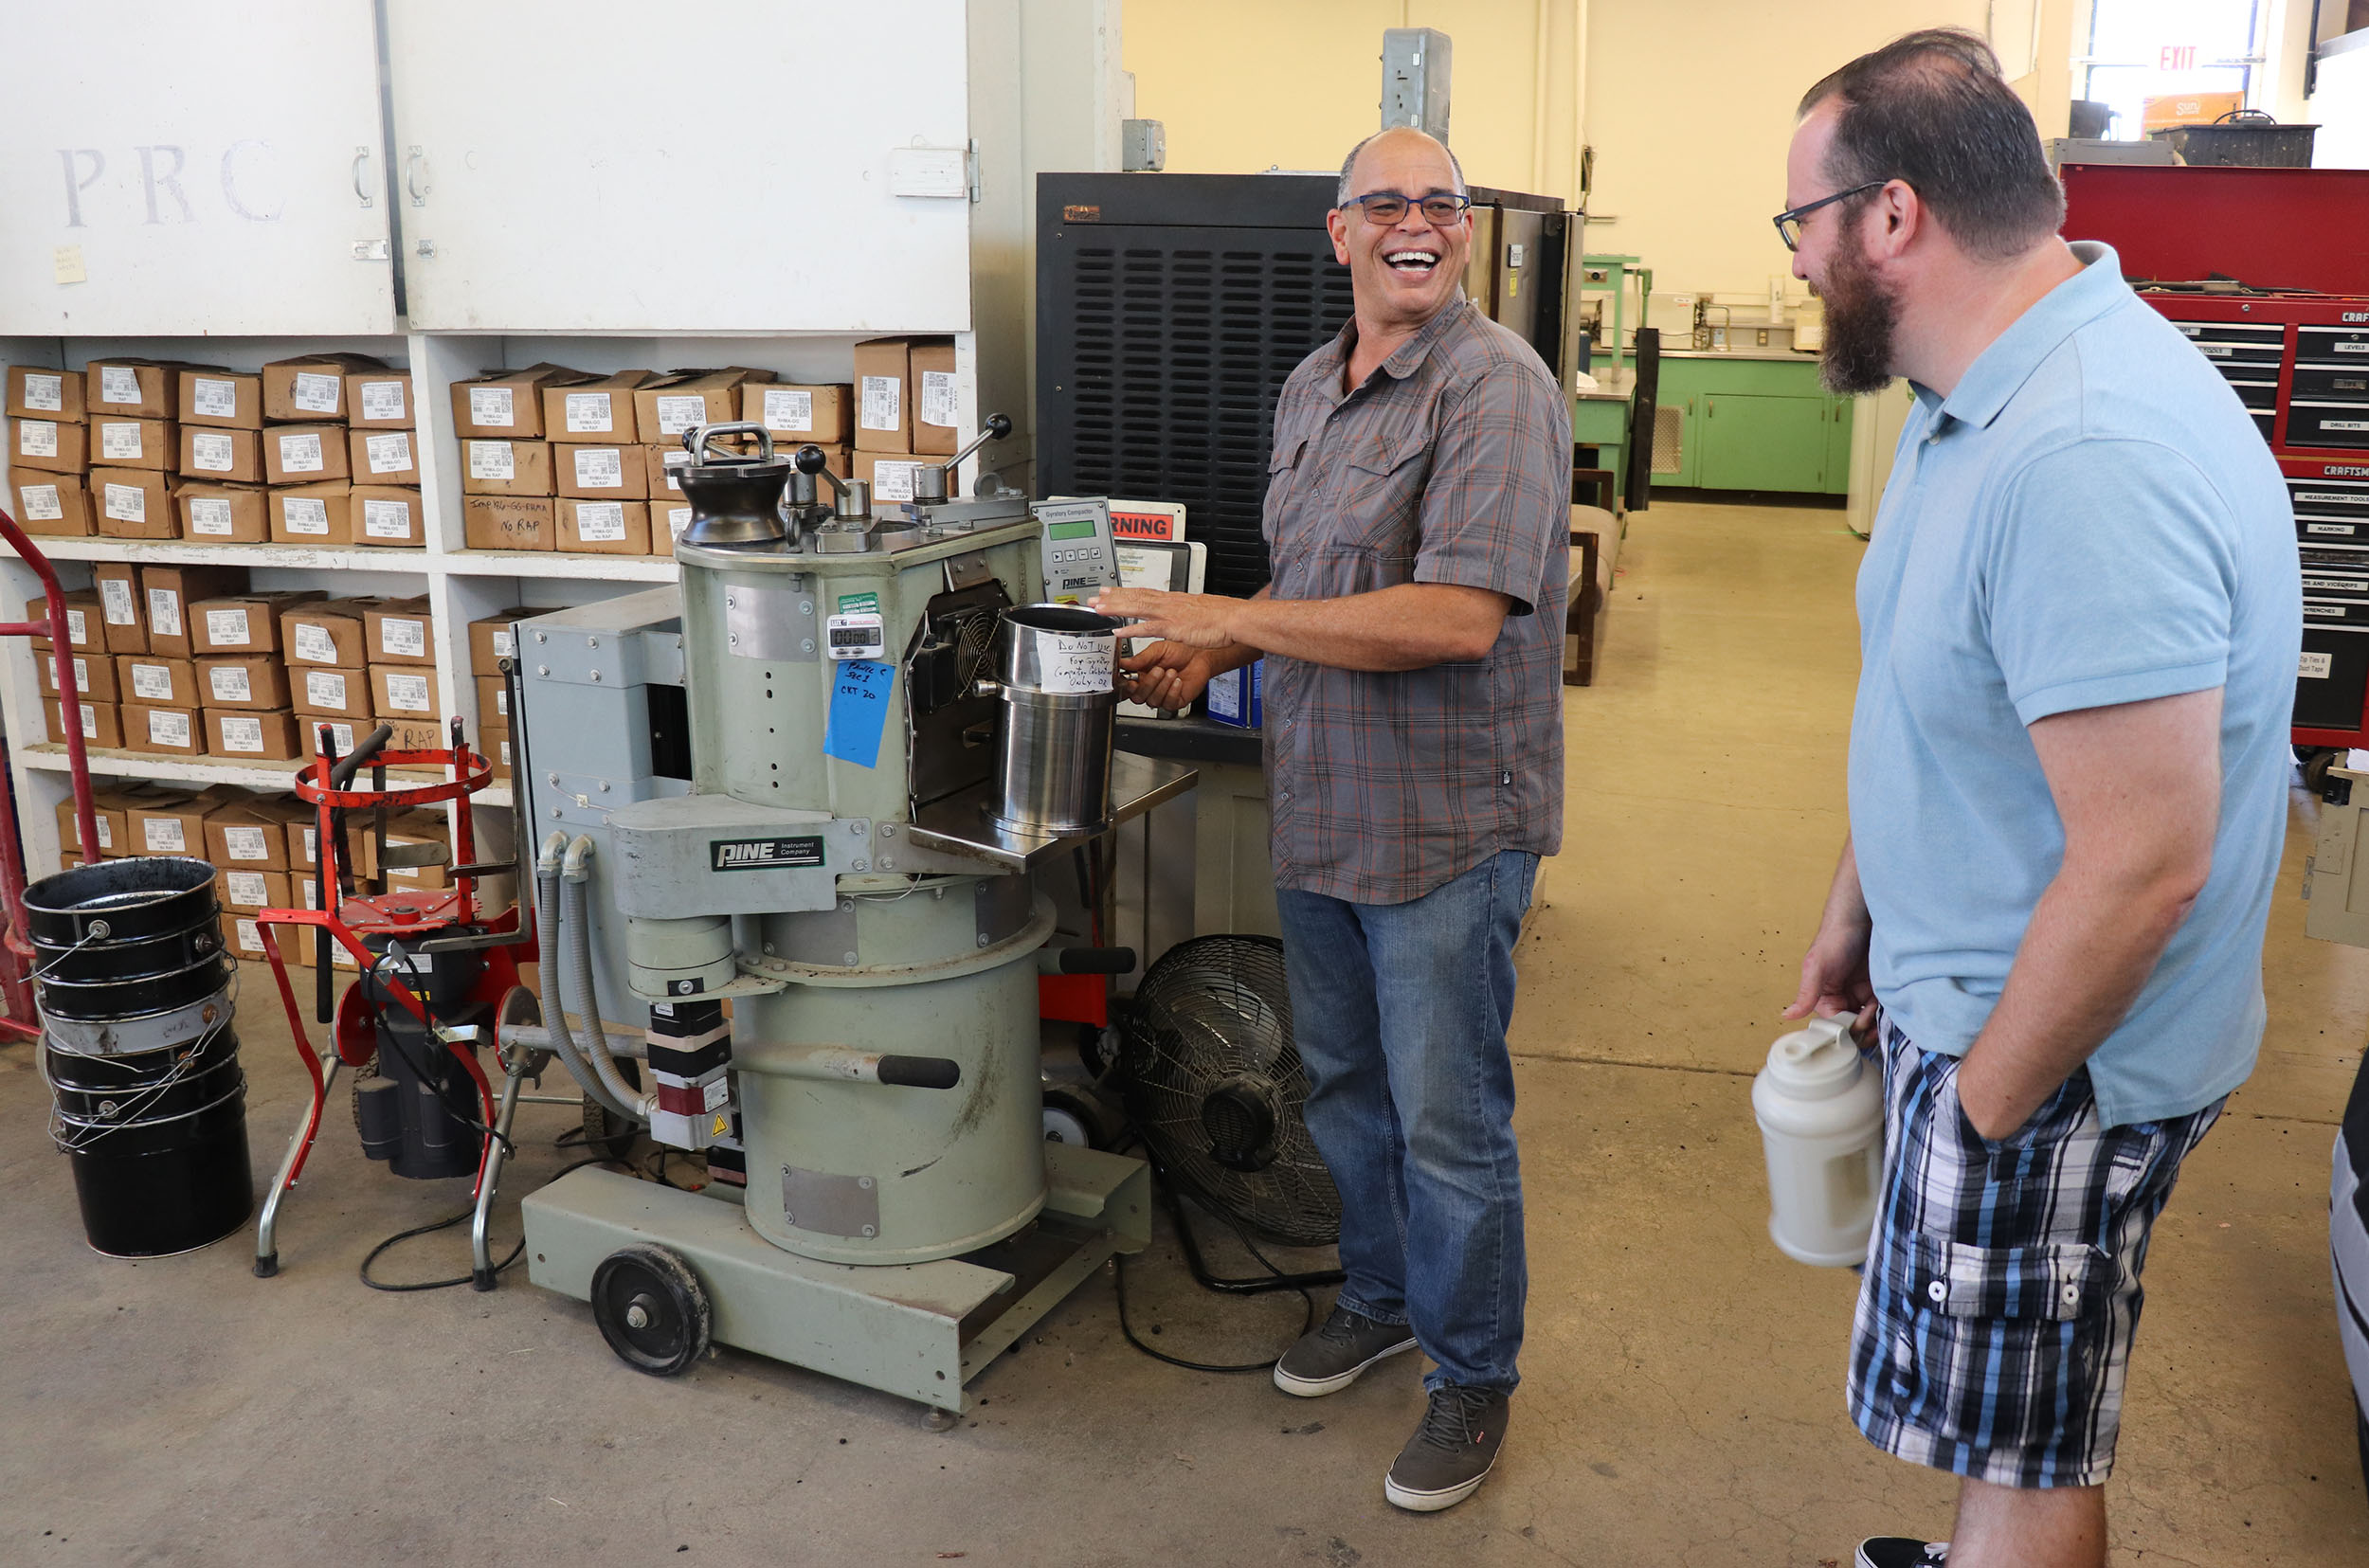 UC PRC Research Engineer Irwin Guada led a tour of the PRC workshop and lab at the Richmond Field Station